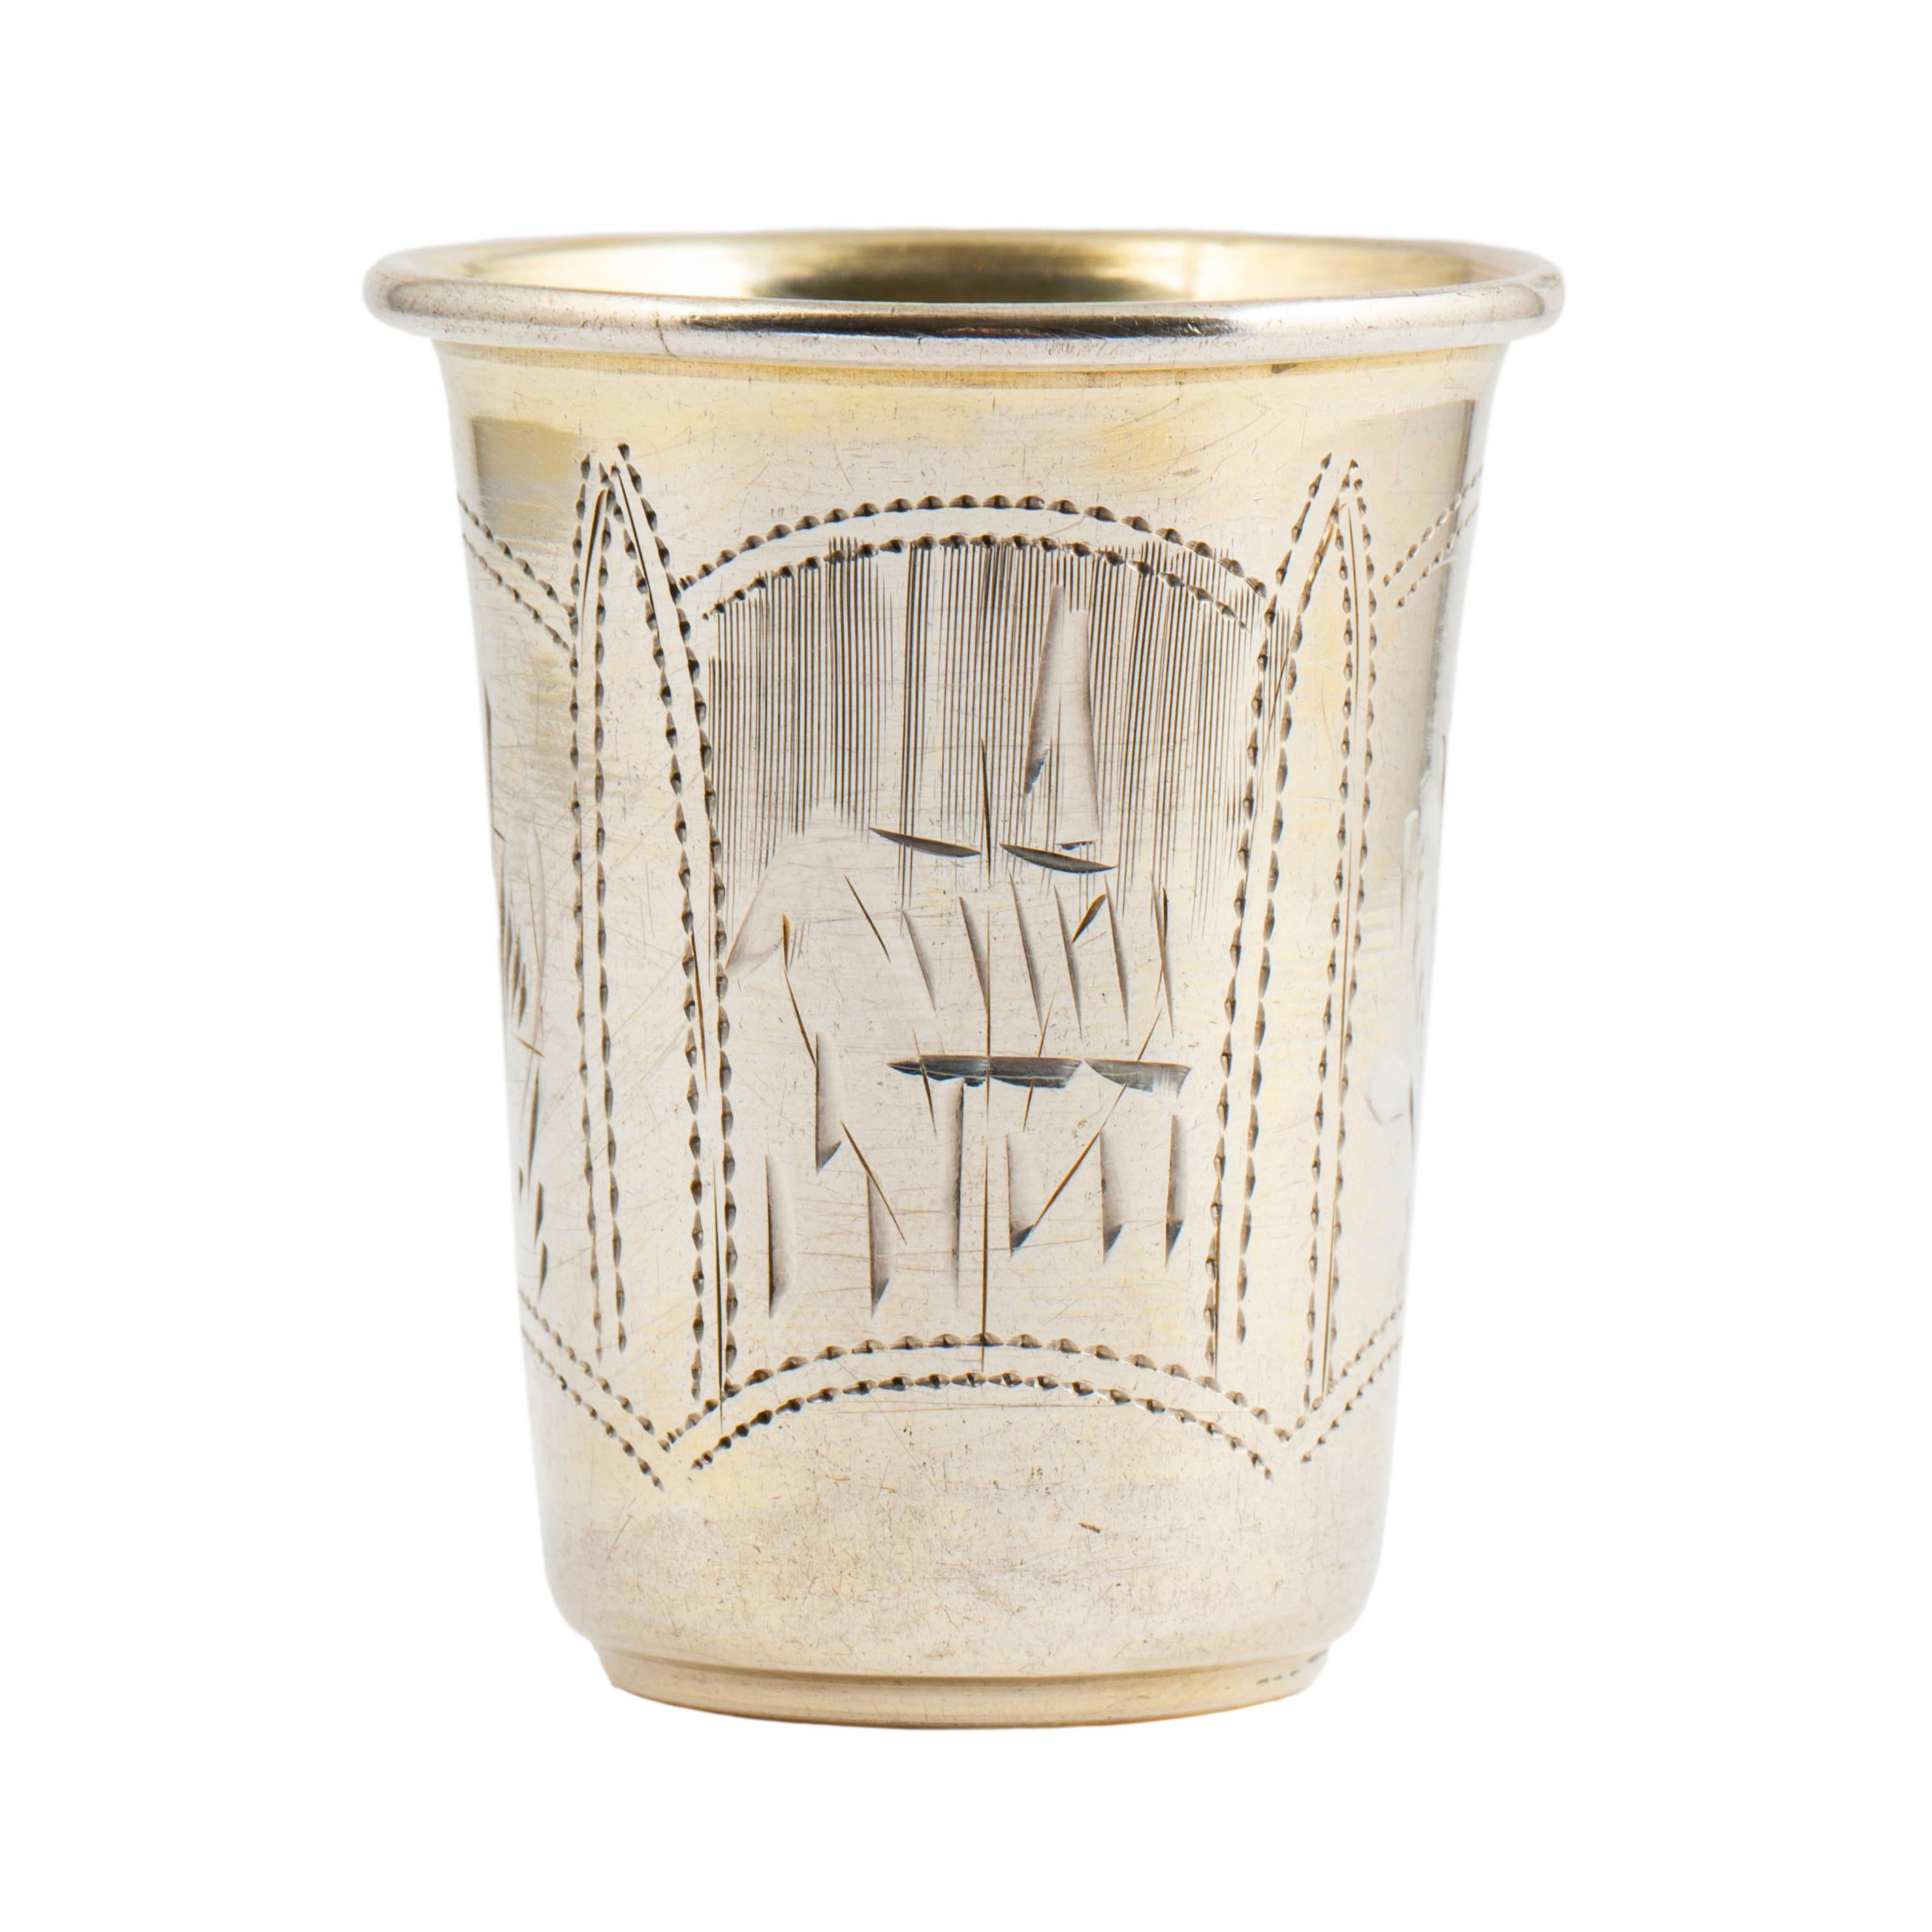 Five Ukrainian Imperial-era Silver Vodka Cups, late 19th to early 20th century 4